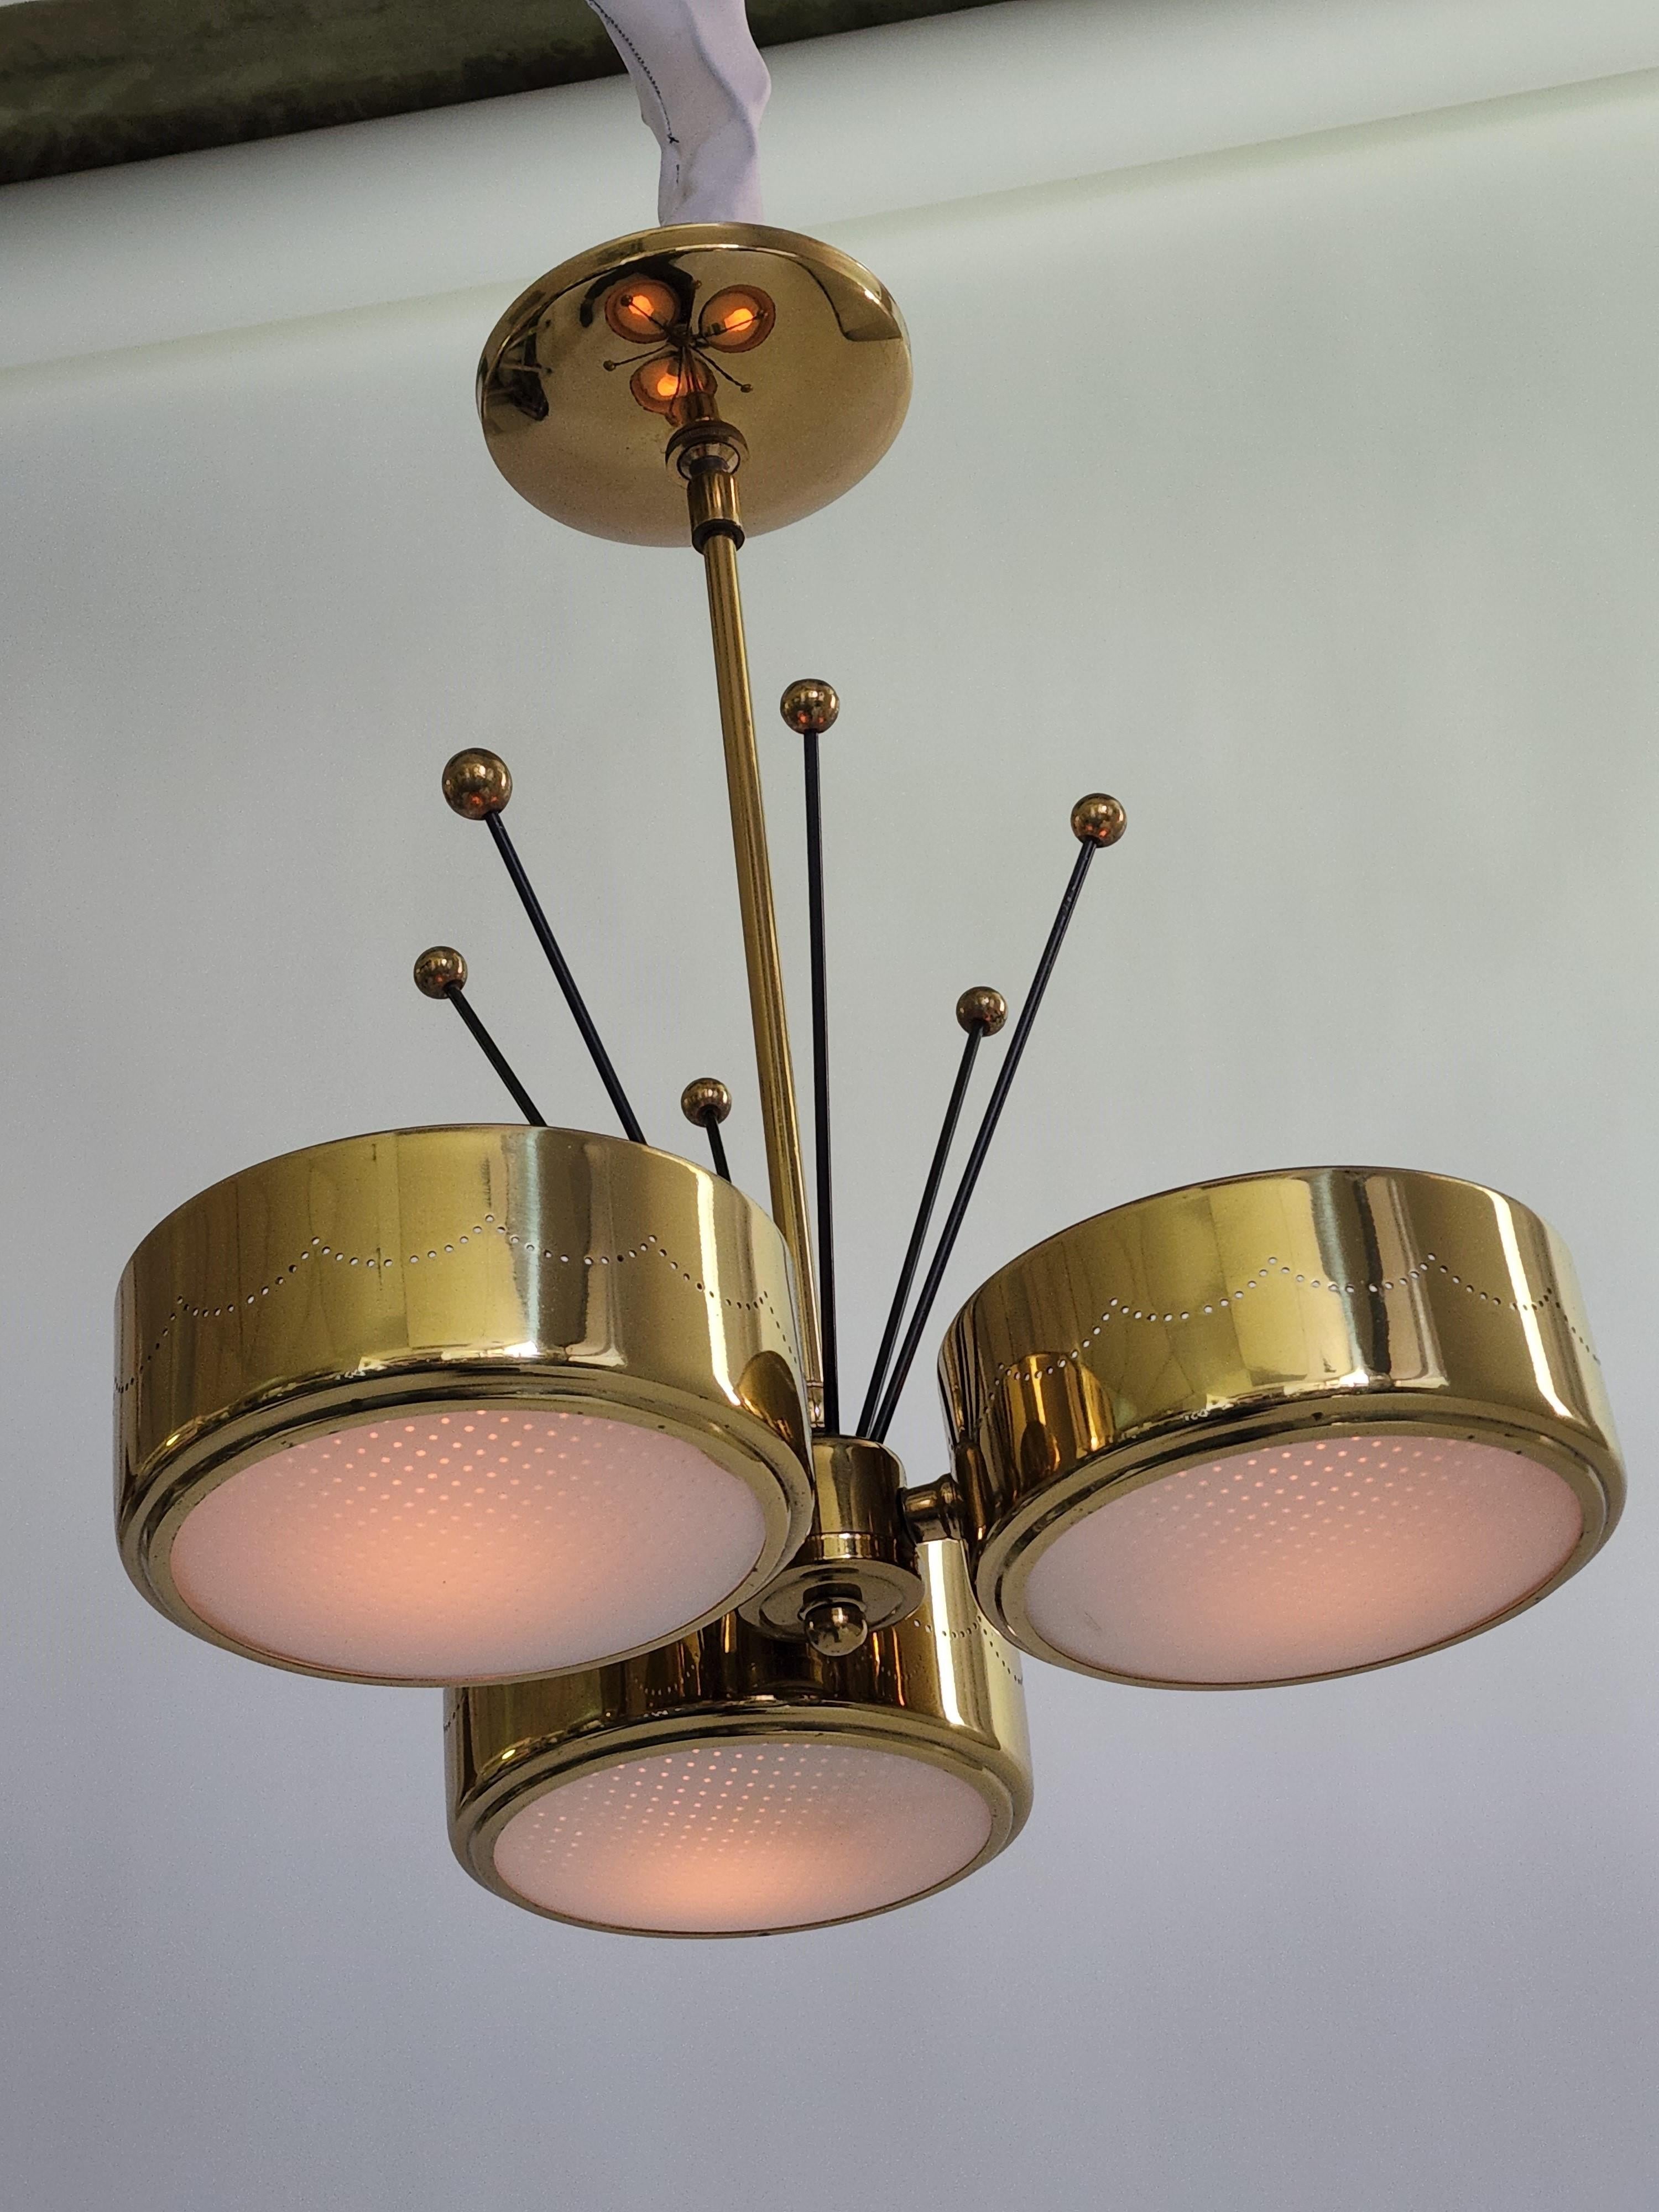 Gerald Thurston pendant made of brass plated pierced aluminium shade, sputnik enameled black steel rod toped with solid brass ball, completed with an opale convex glass diffuser under. 

Measure 14.5 wide by 17 in. high. 

Each shade measure